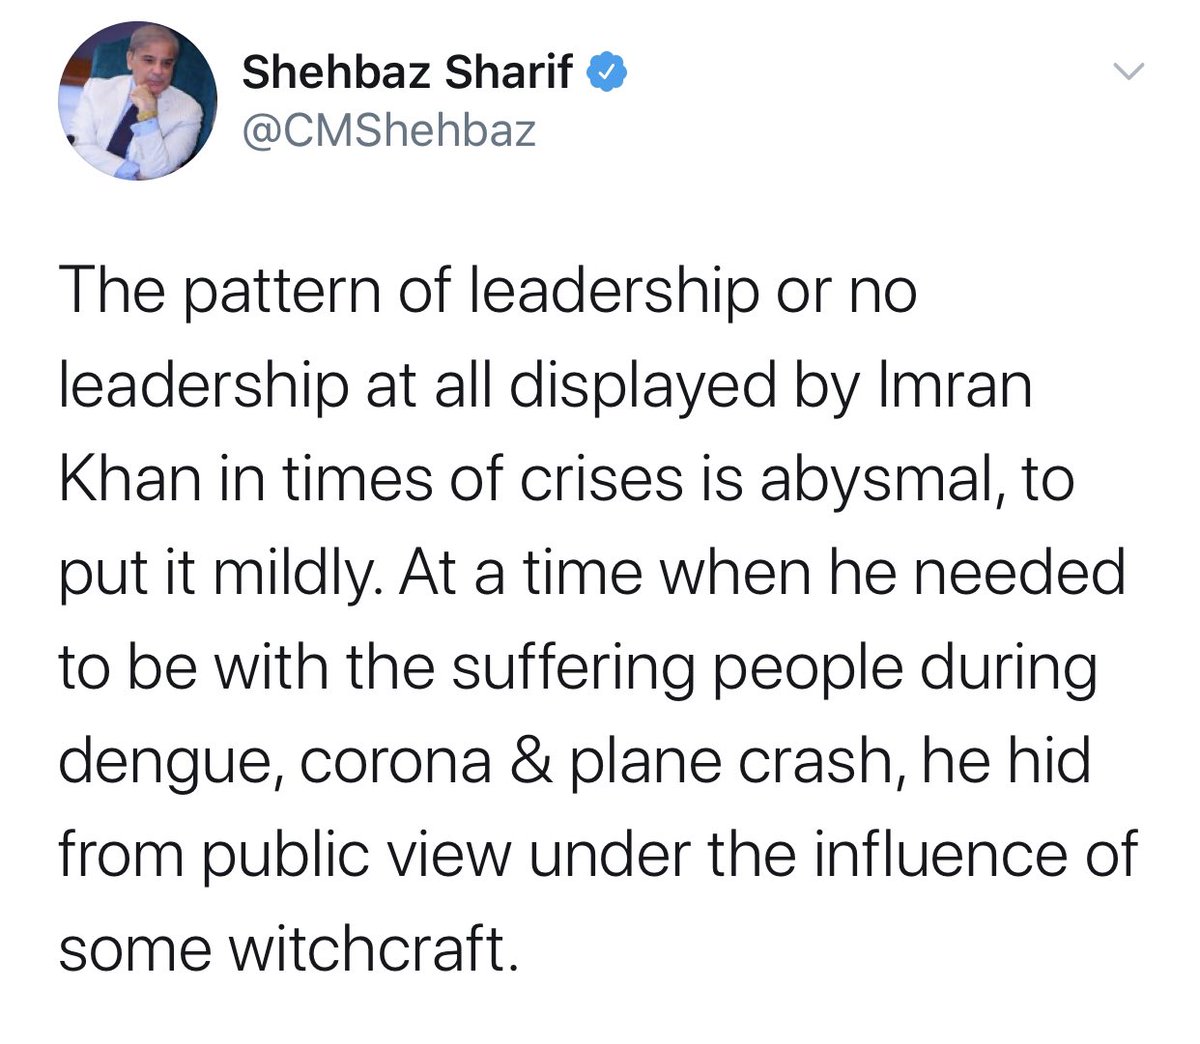 Reason why these leaders seemed to have driven their Pervasive Energy from Top Tier is no secret,only the fact that it didn’t catch the eyes of those blaming Pti influencing “abuse”.SM Abuse IS a reality but blaming Pti harbouring it,kills the Purpose.Next Thread on PPP soon.